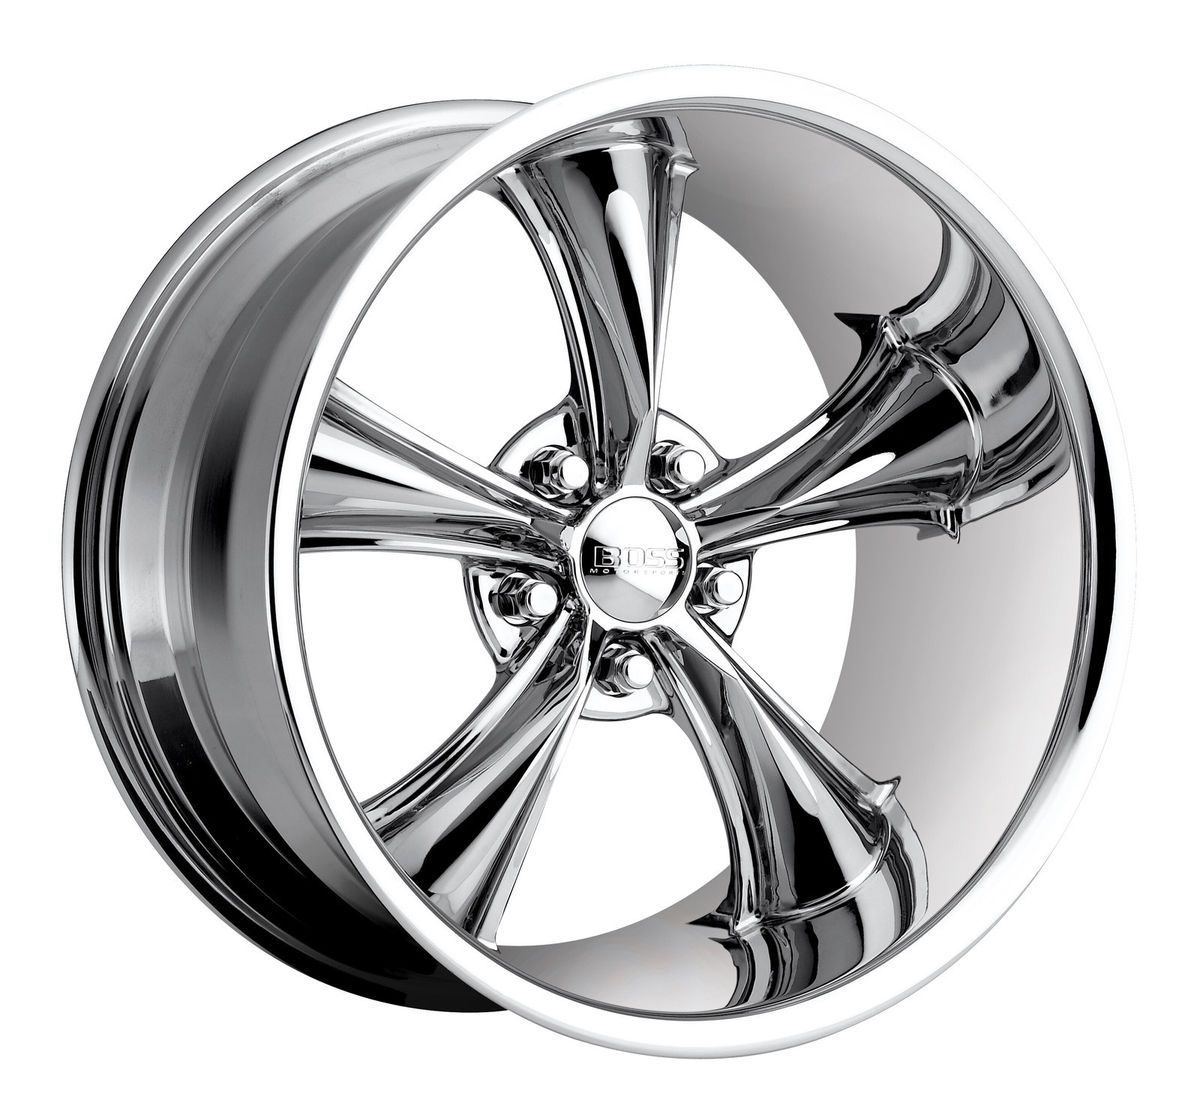 CPP Boss 338 wheels rims, 18x8, fits DODGE CHARGER CHALLENGER MAGNUM